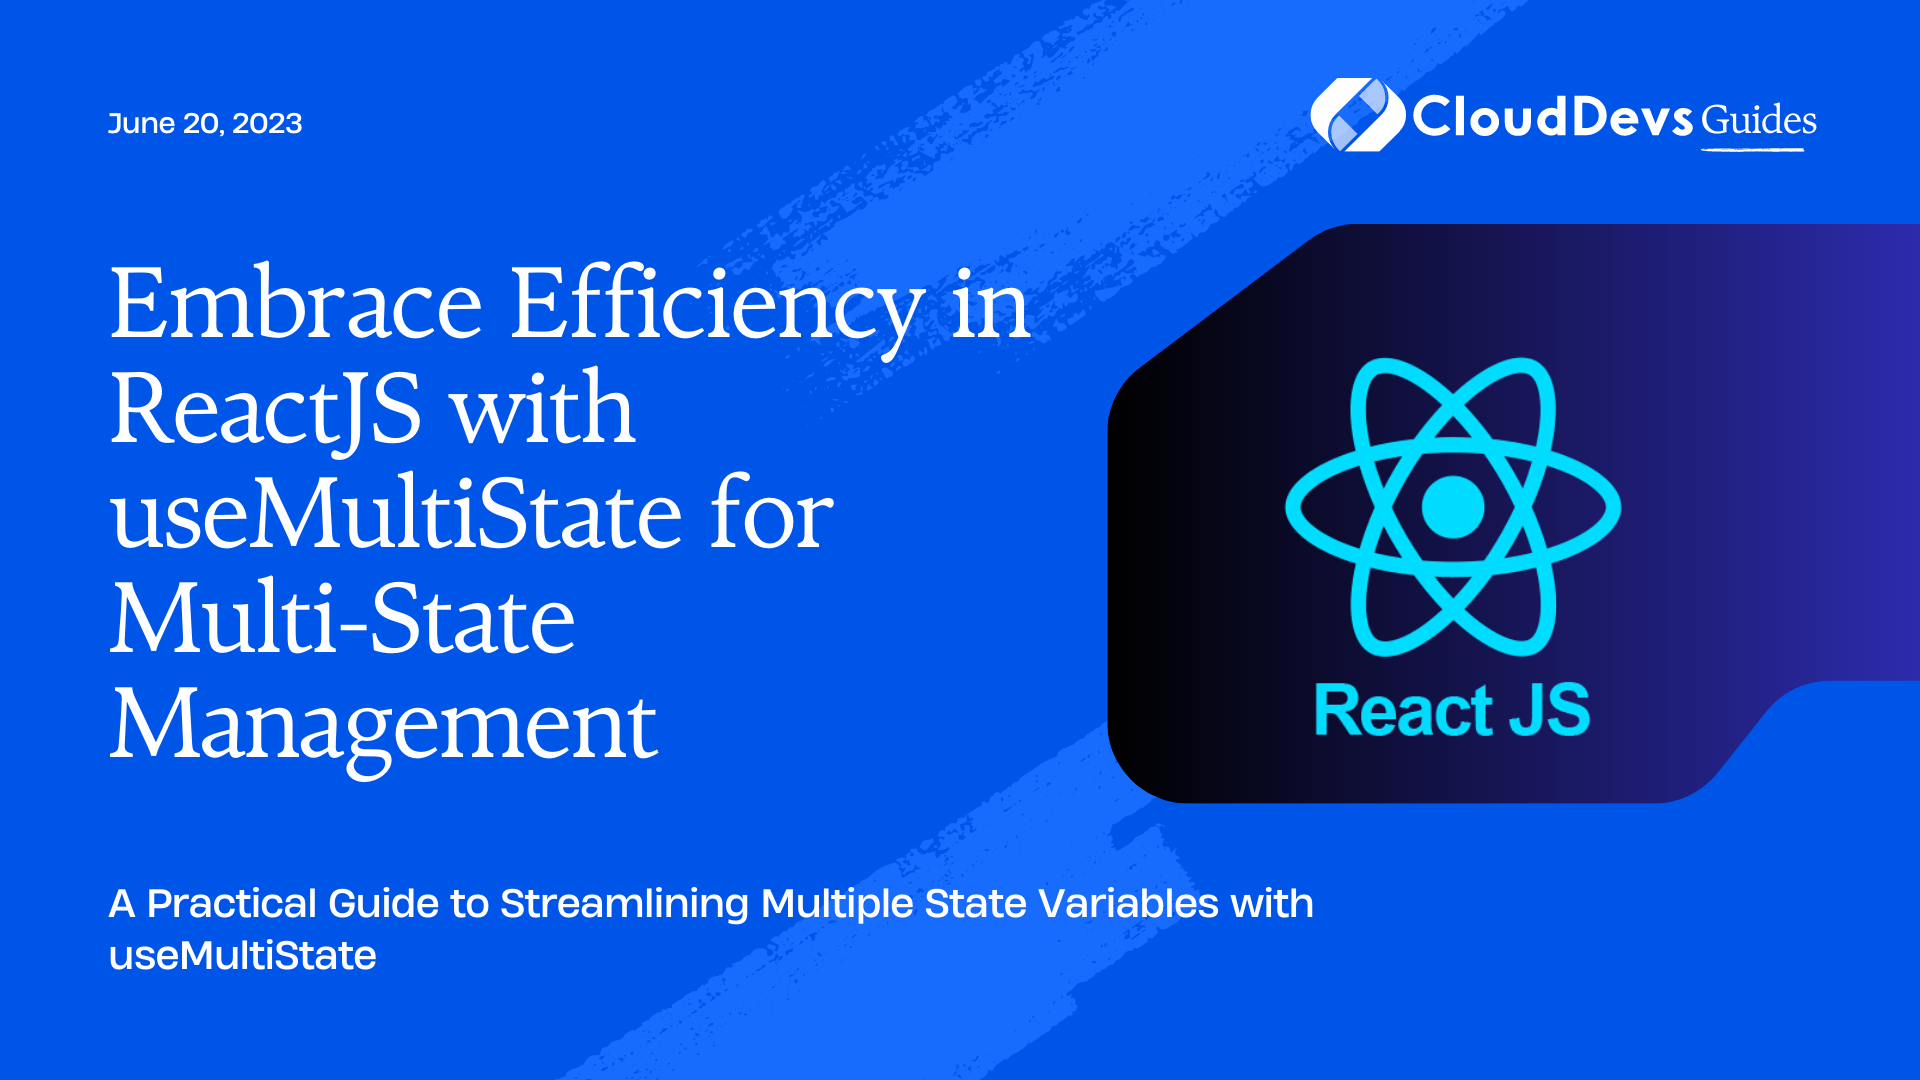 Embrace Efficiency in ReactJS with useMultiState for Multi-State Management